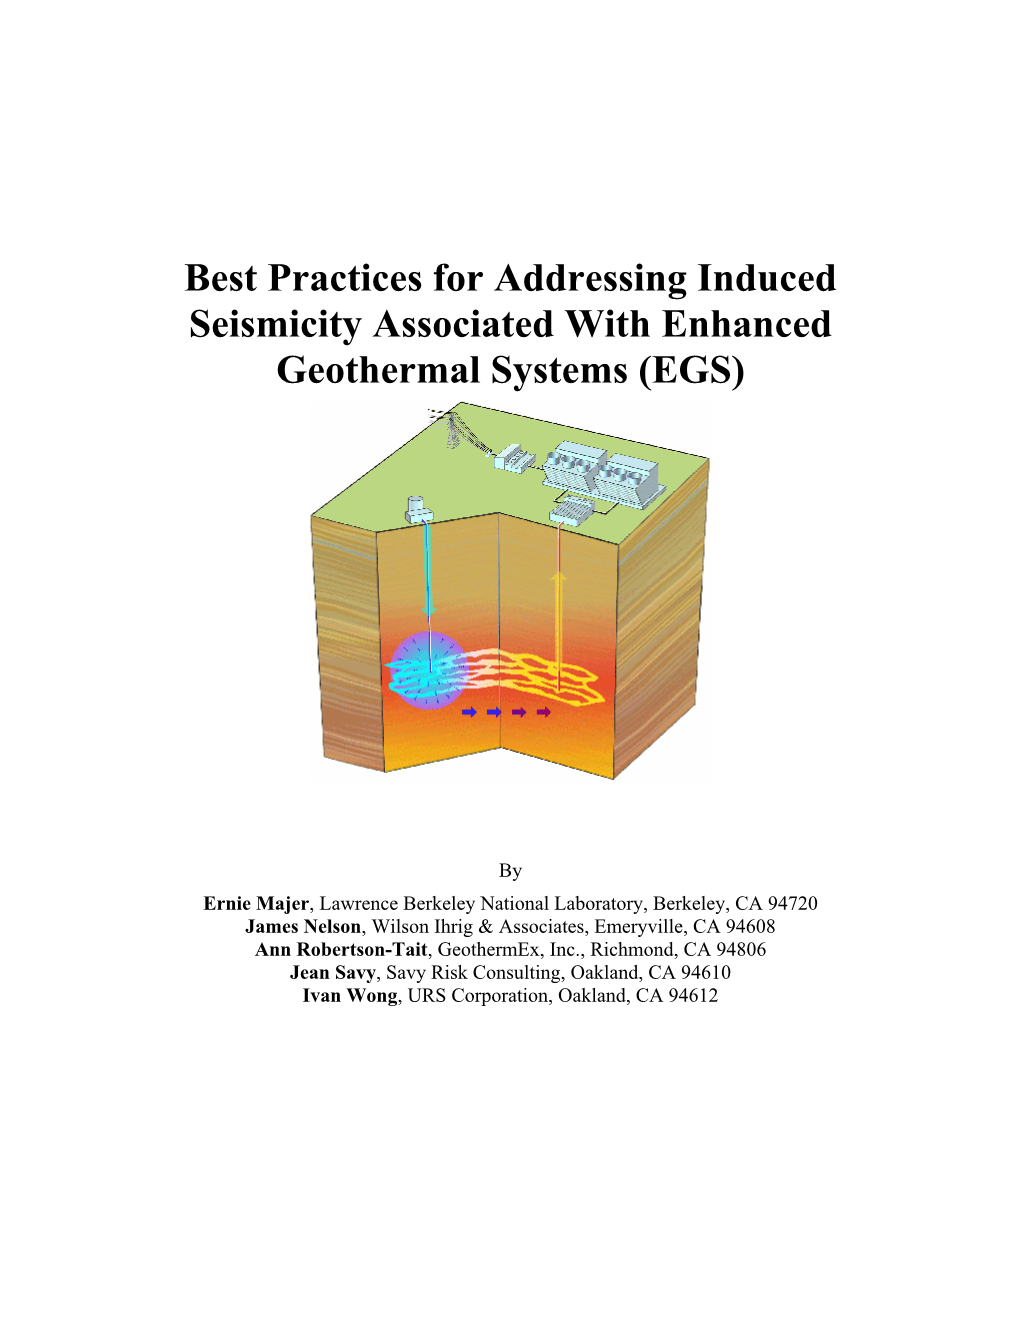 Best Practices for Addressing Induced Seismicity Associated with Enhanced Geothermal Systems (EGS)